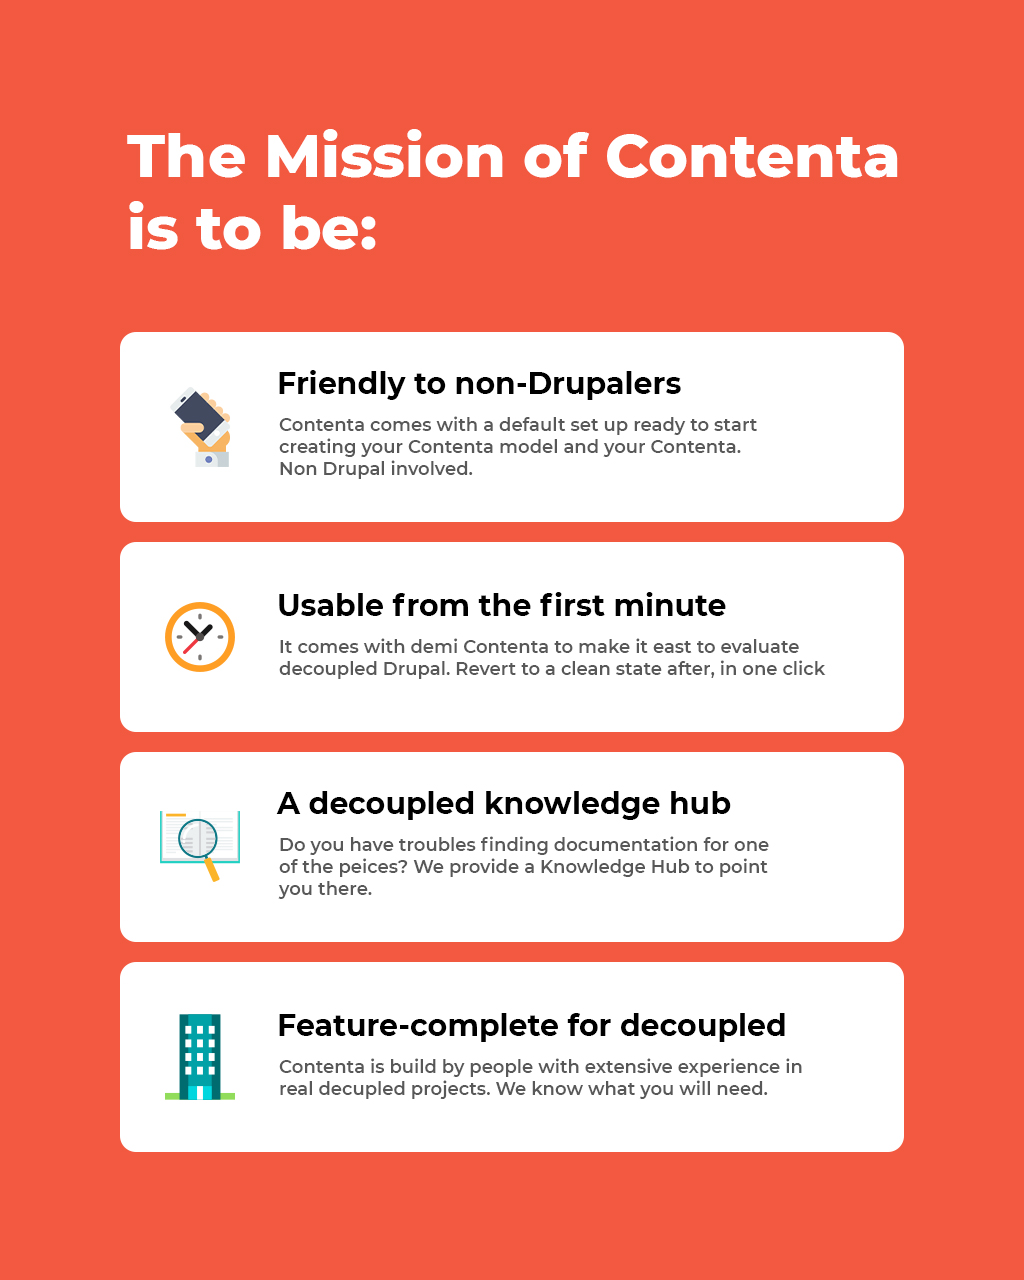 illustration image showing the for mission statements for contenta in a text format in orange and white colours